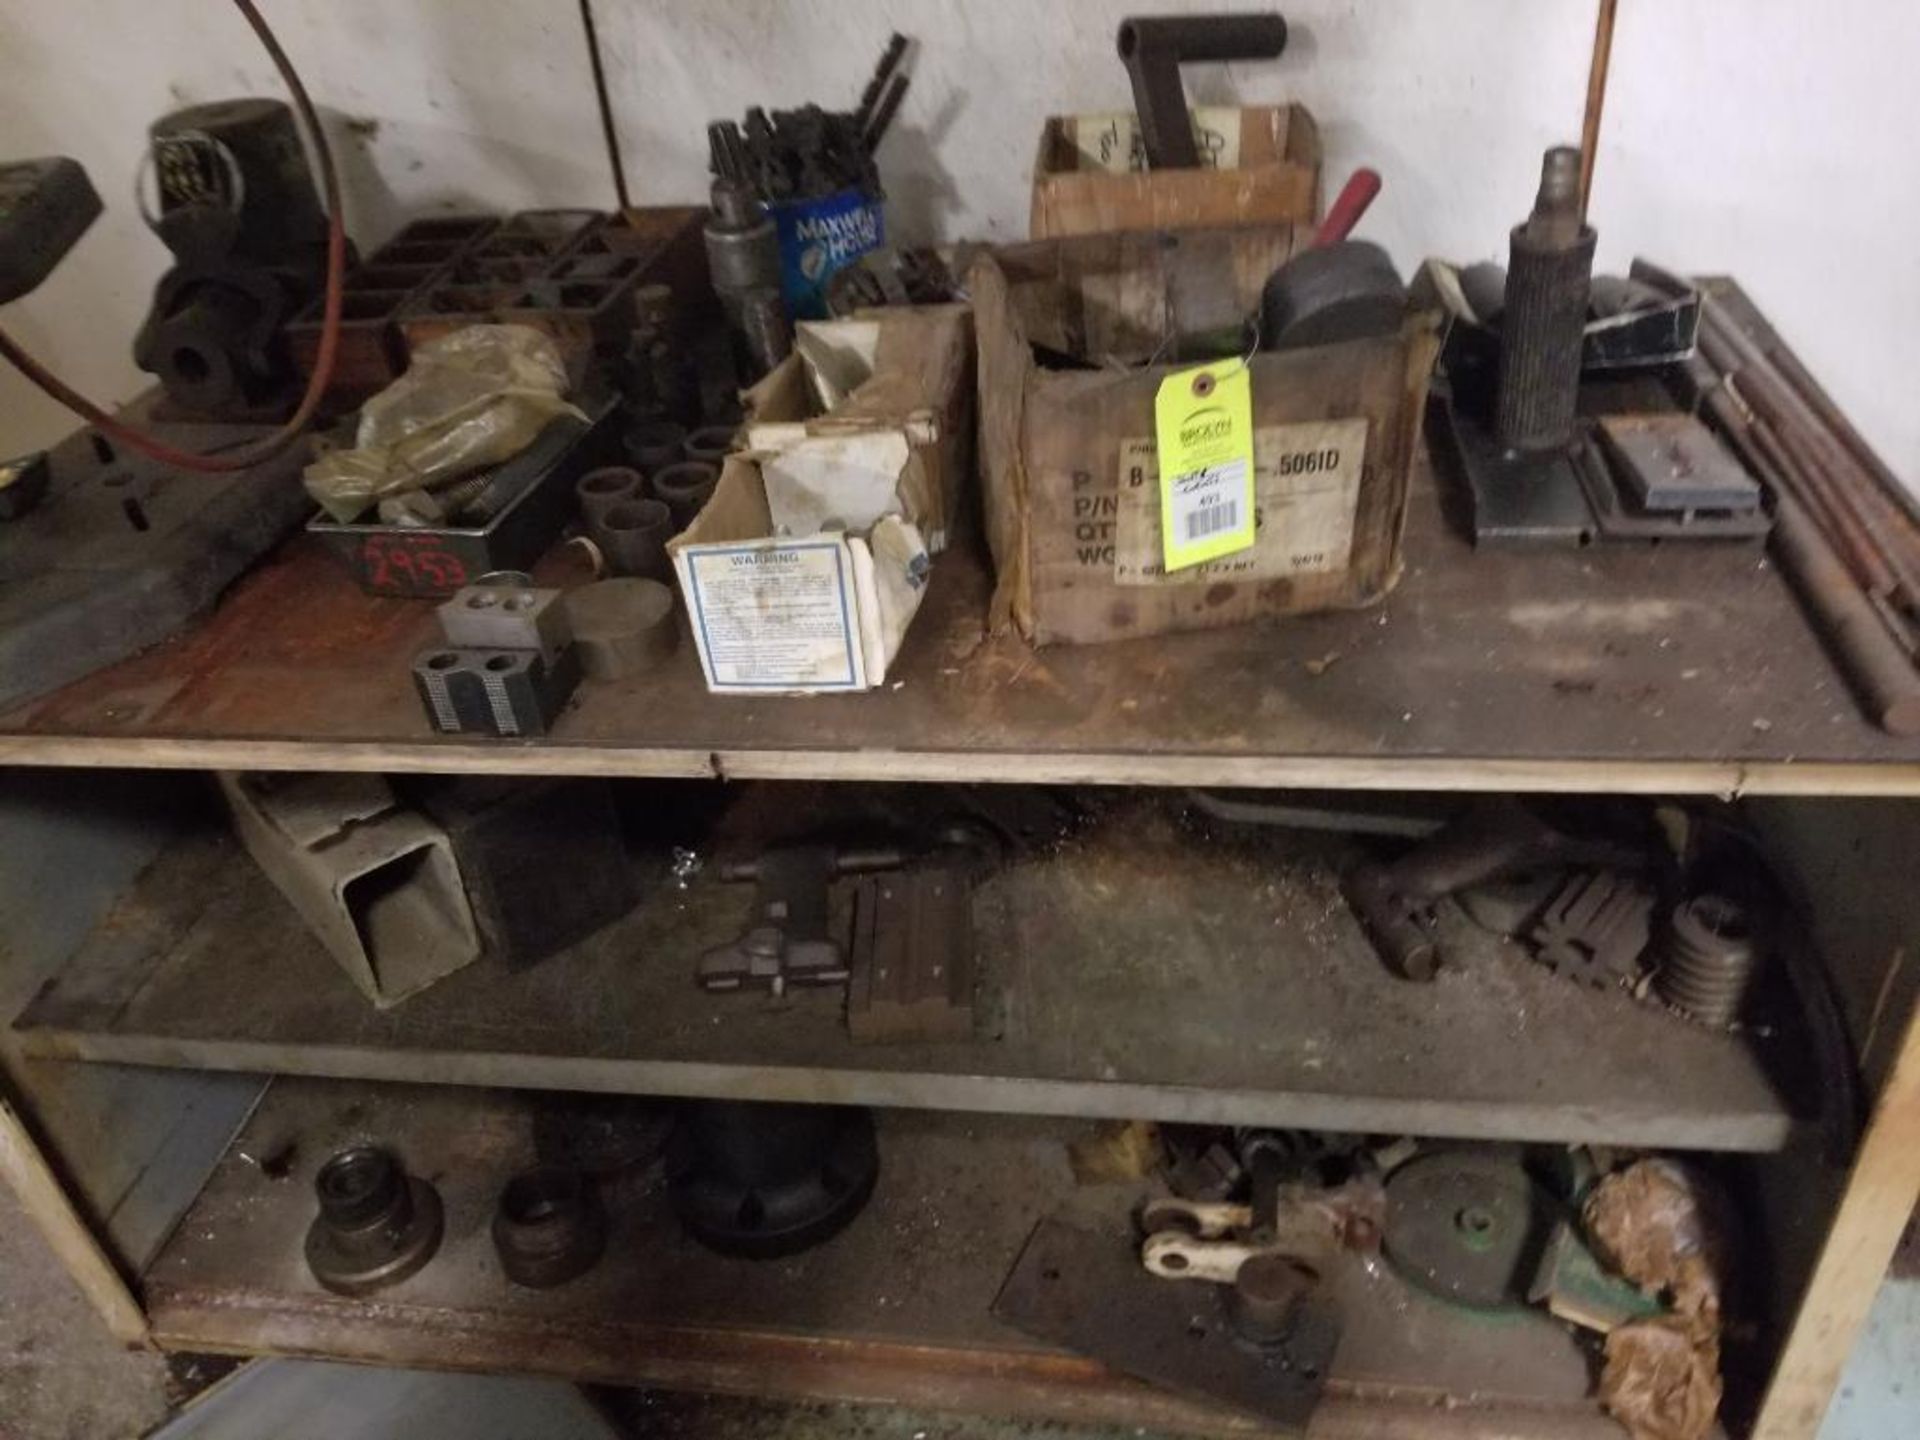 Steel shelf with contents of tooling etc.